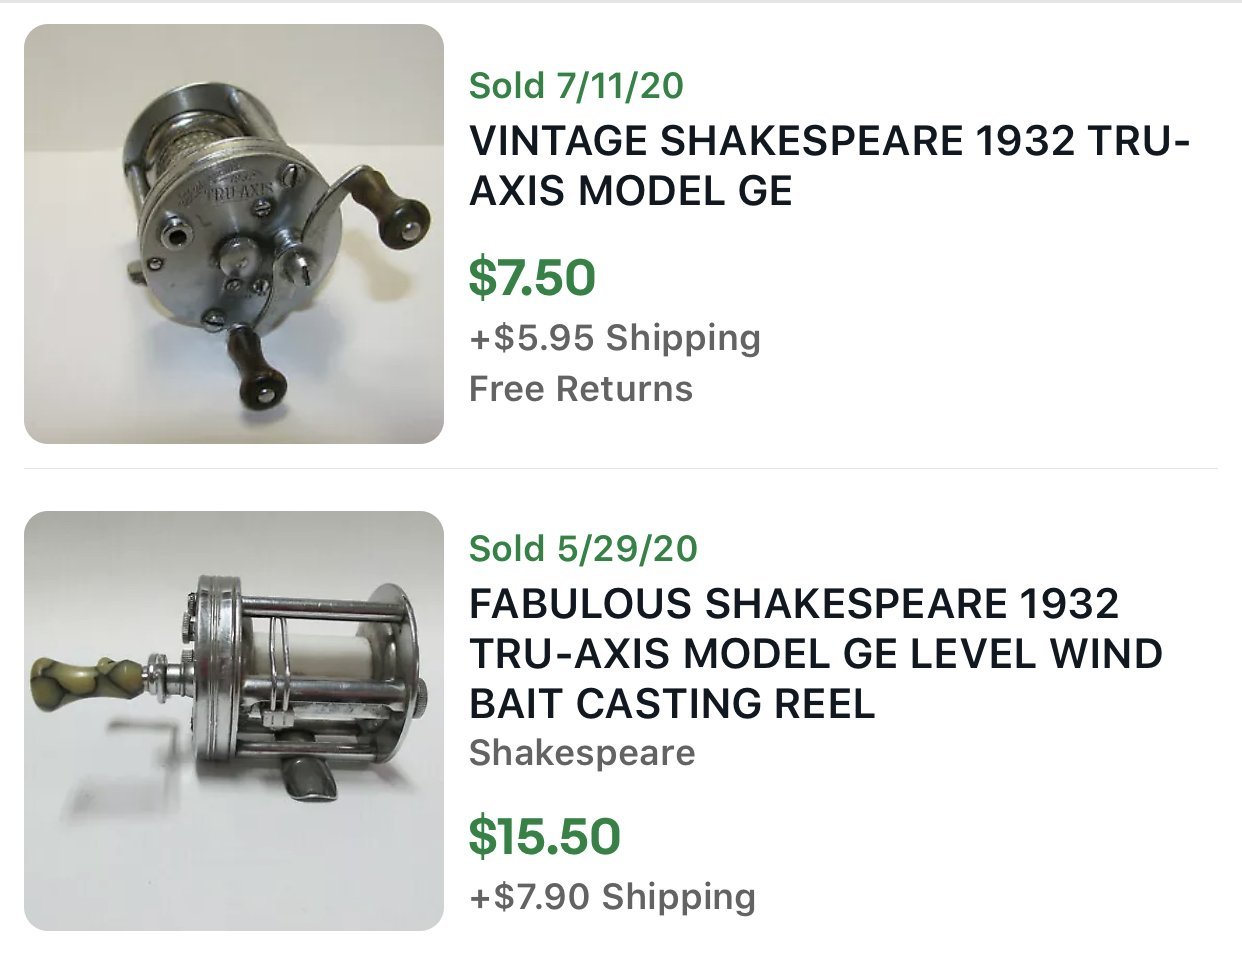 What Is My Shakespeare 1932 Tru-axis Model Ge Worth